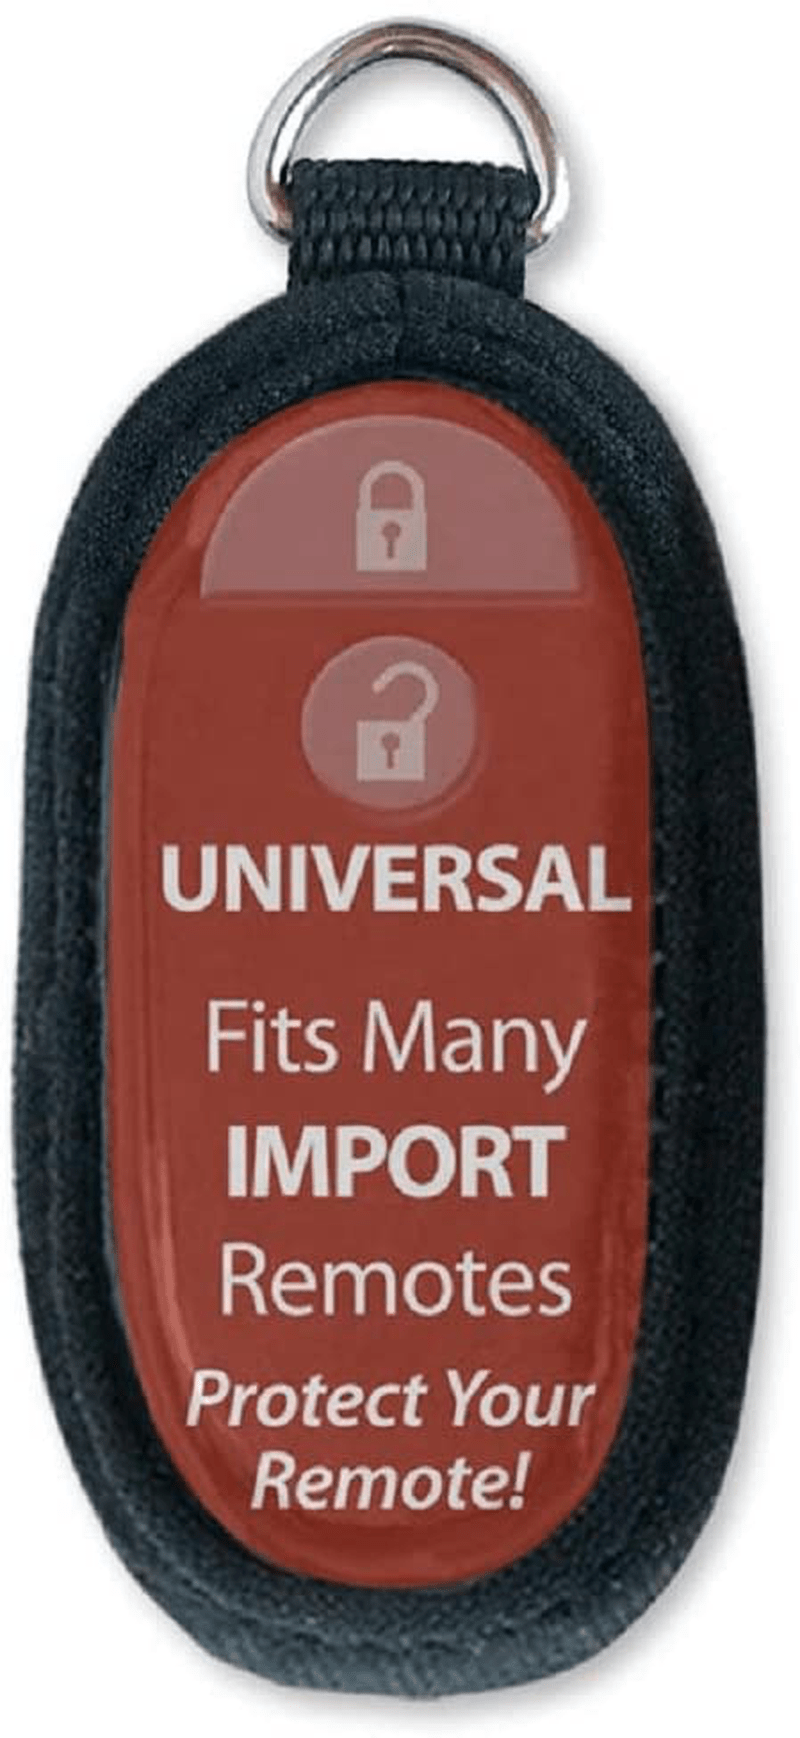 Lucky Line Flexible Remote Skin, Ford, 1 Per Pack (48801)